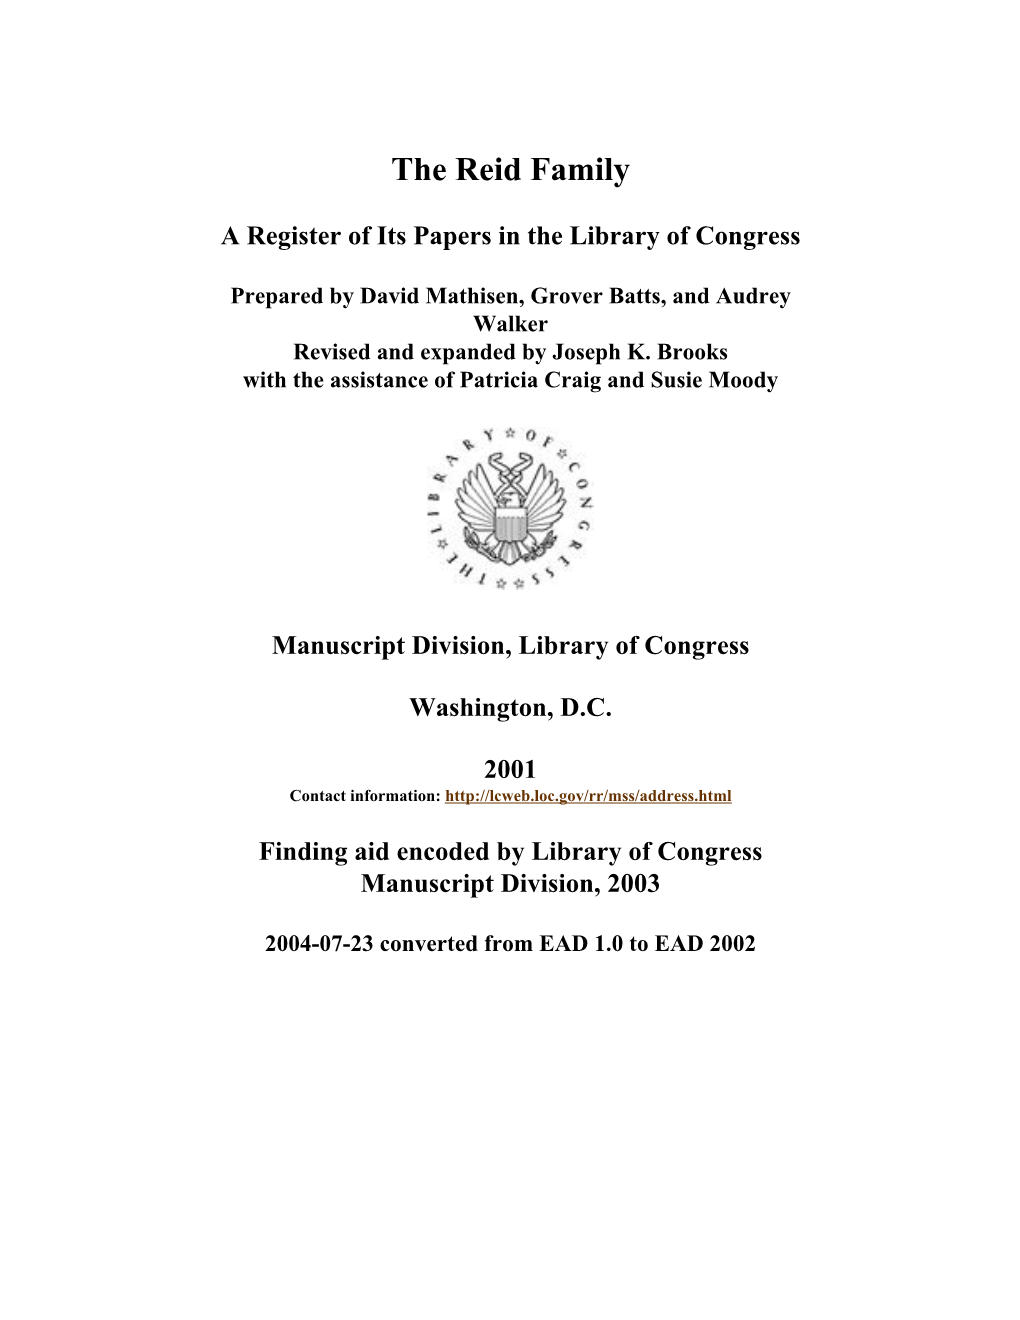 Reid Family Papers [Finding Aid]. Library of Congress